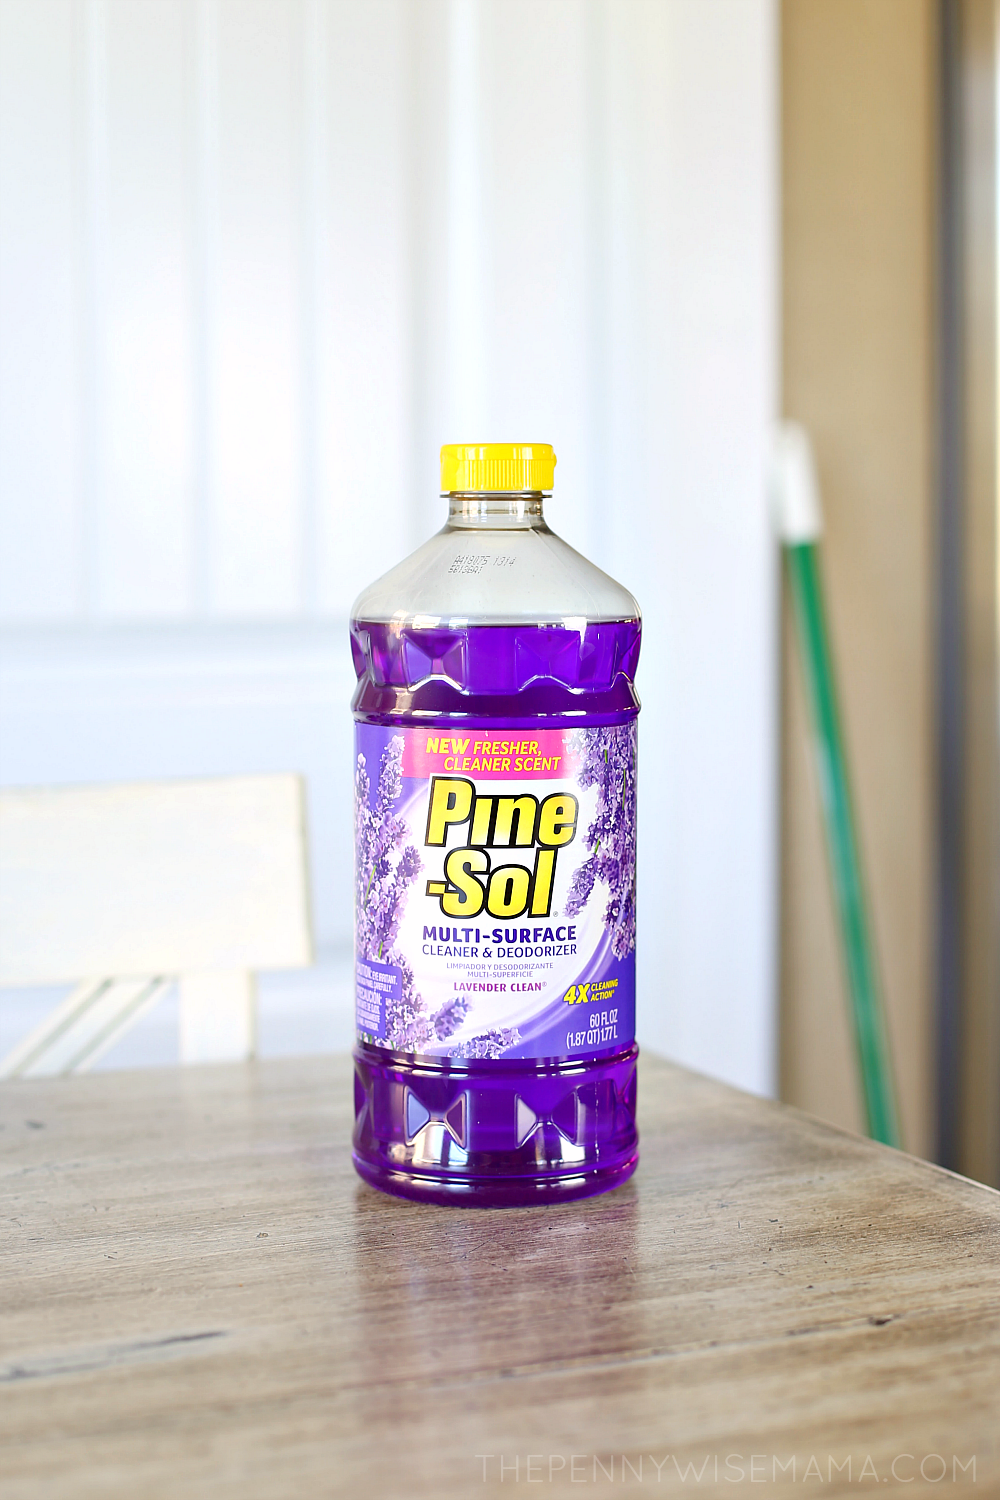 Make Cleaning Fun! Pine-Sol My Clean Moves Contest - The PennyWiseMama Why Does Pine Sol Smell Like Urine